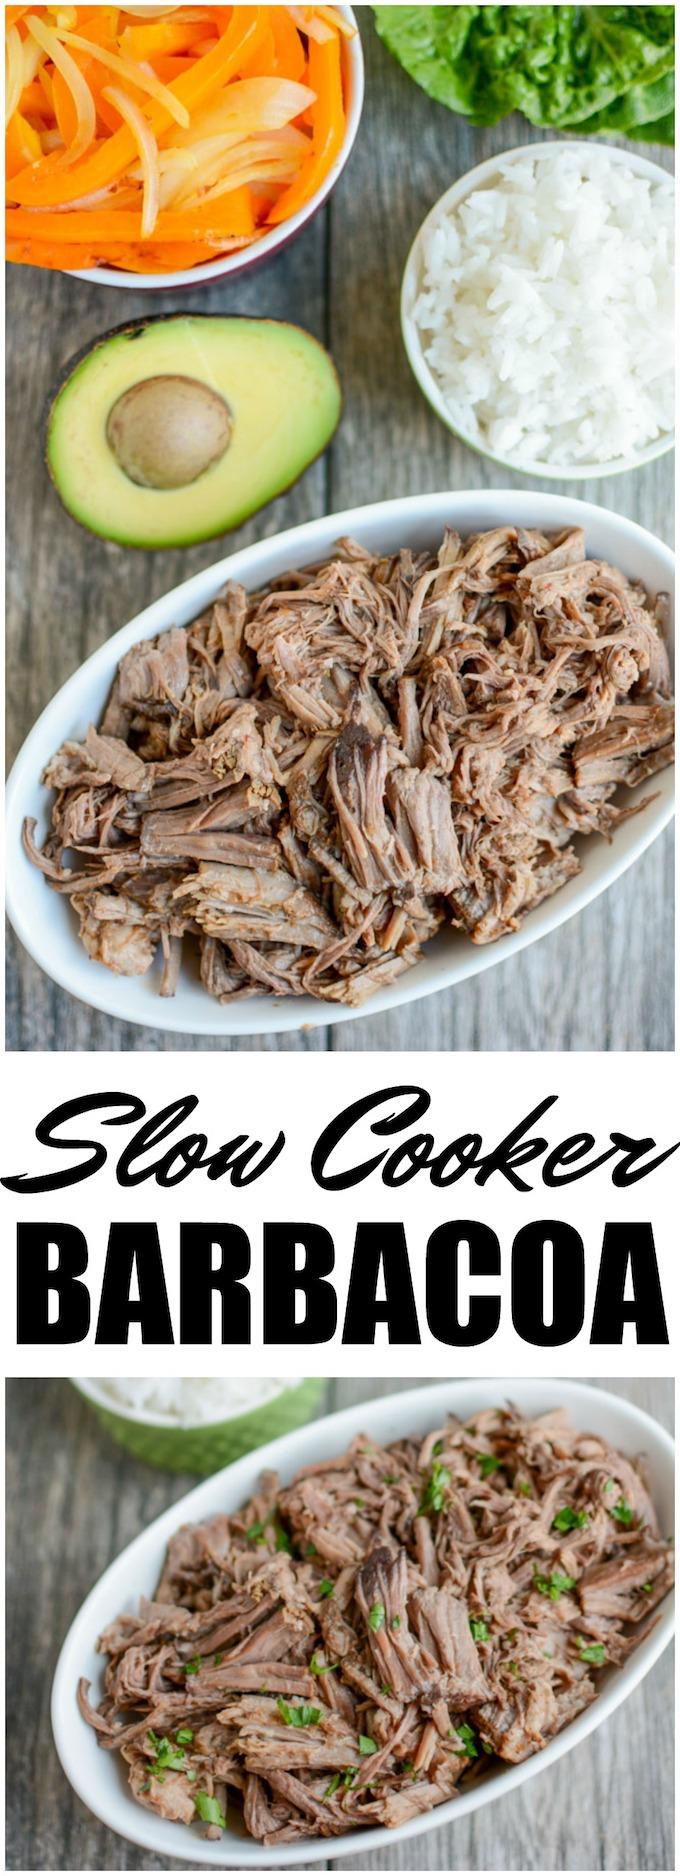 This Slow Cooker Shredded Beef is easy to make in the crockpot for dinner and tastes better than the Barbacoa at Chipotle. Perfect in burrito bowls, salads and enchiladas!